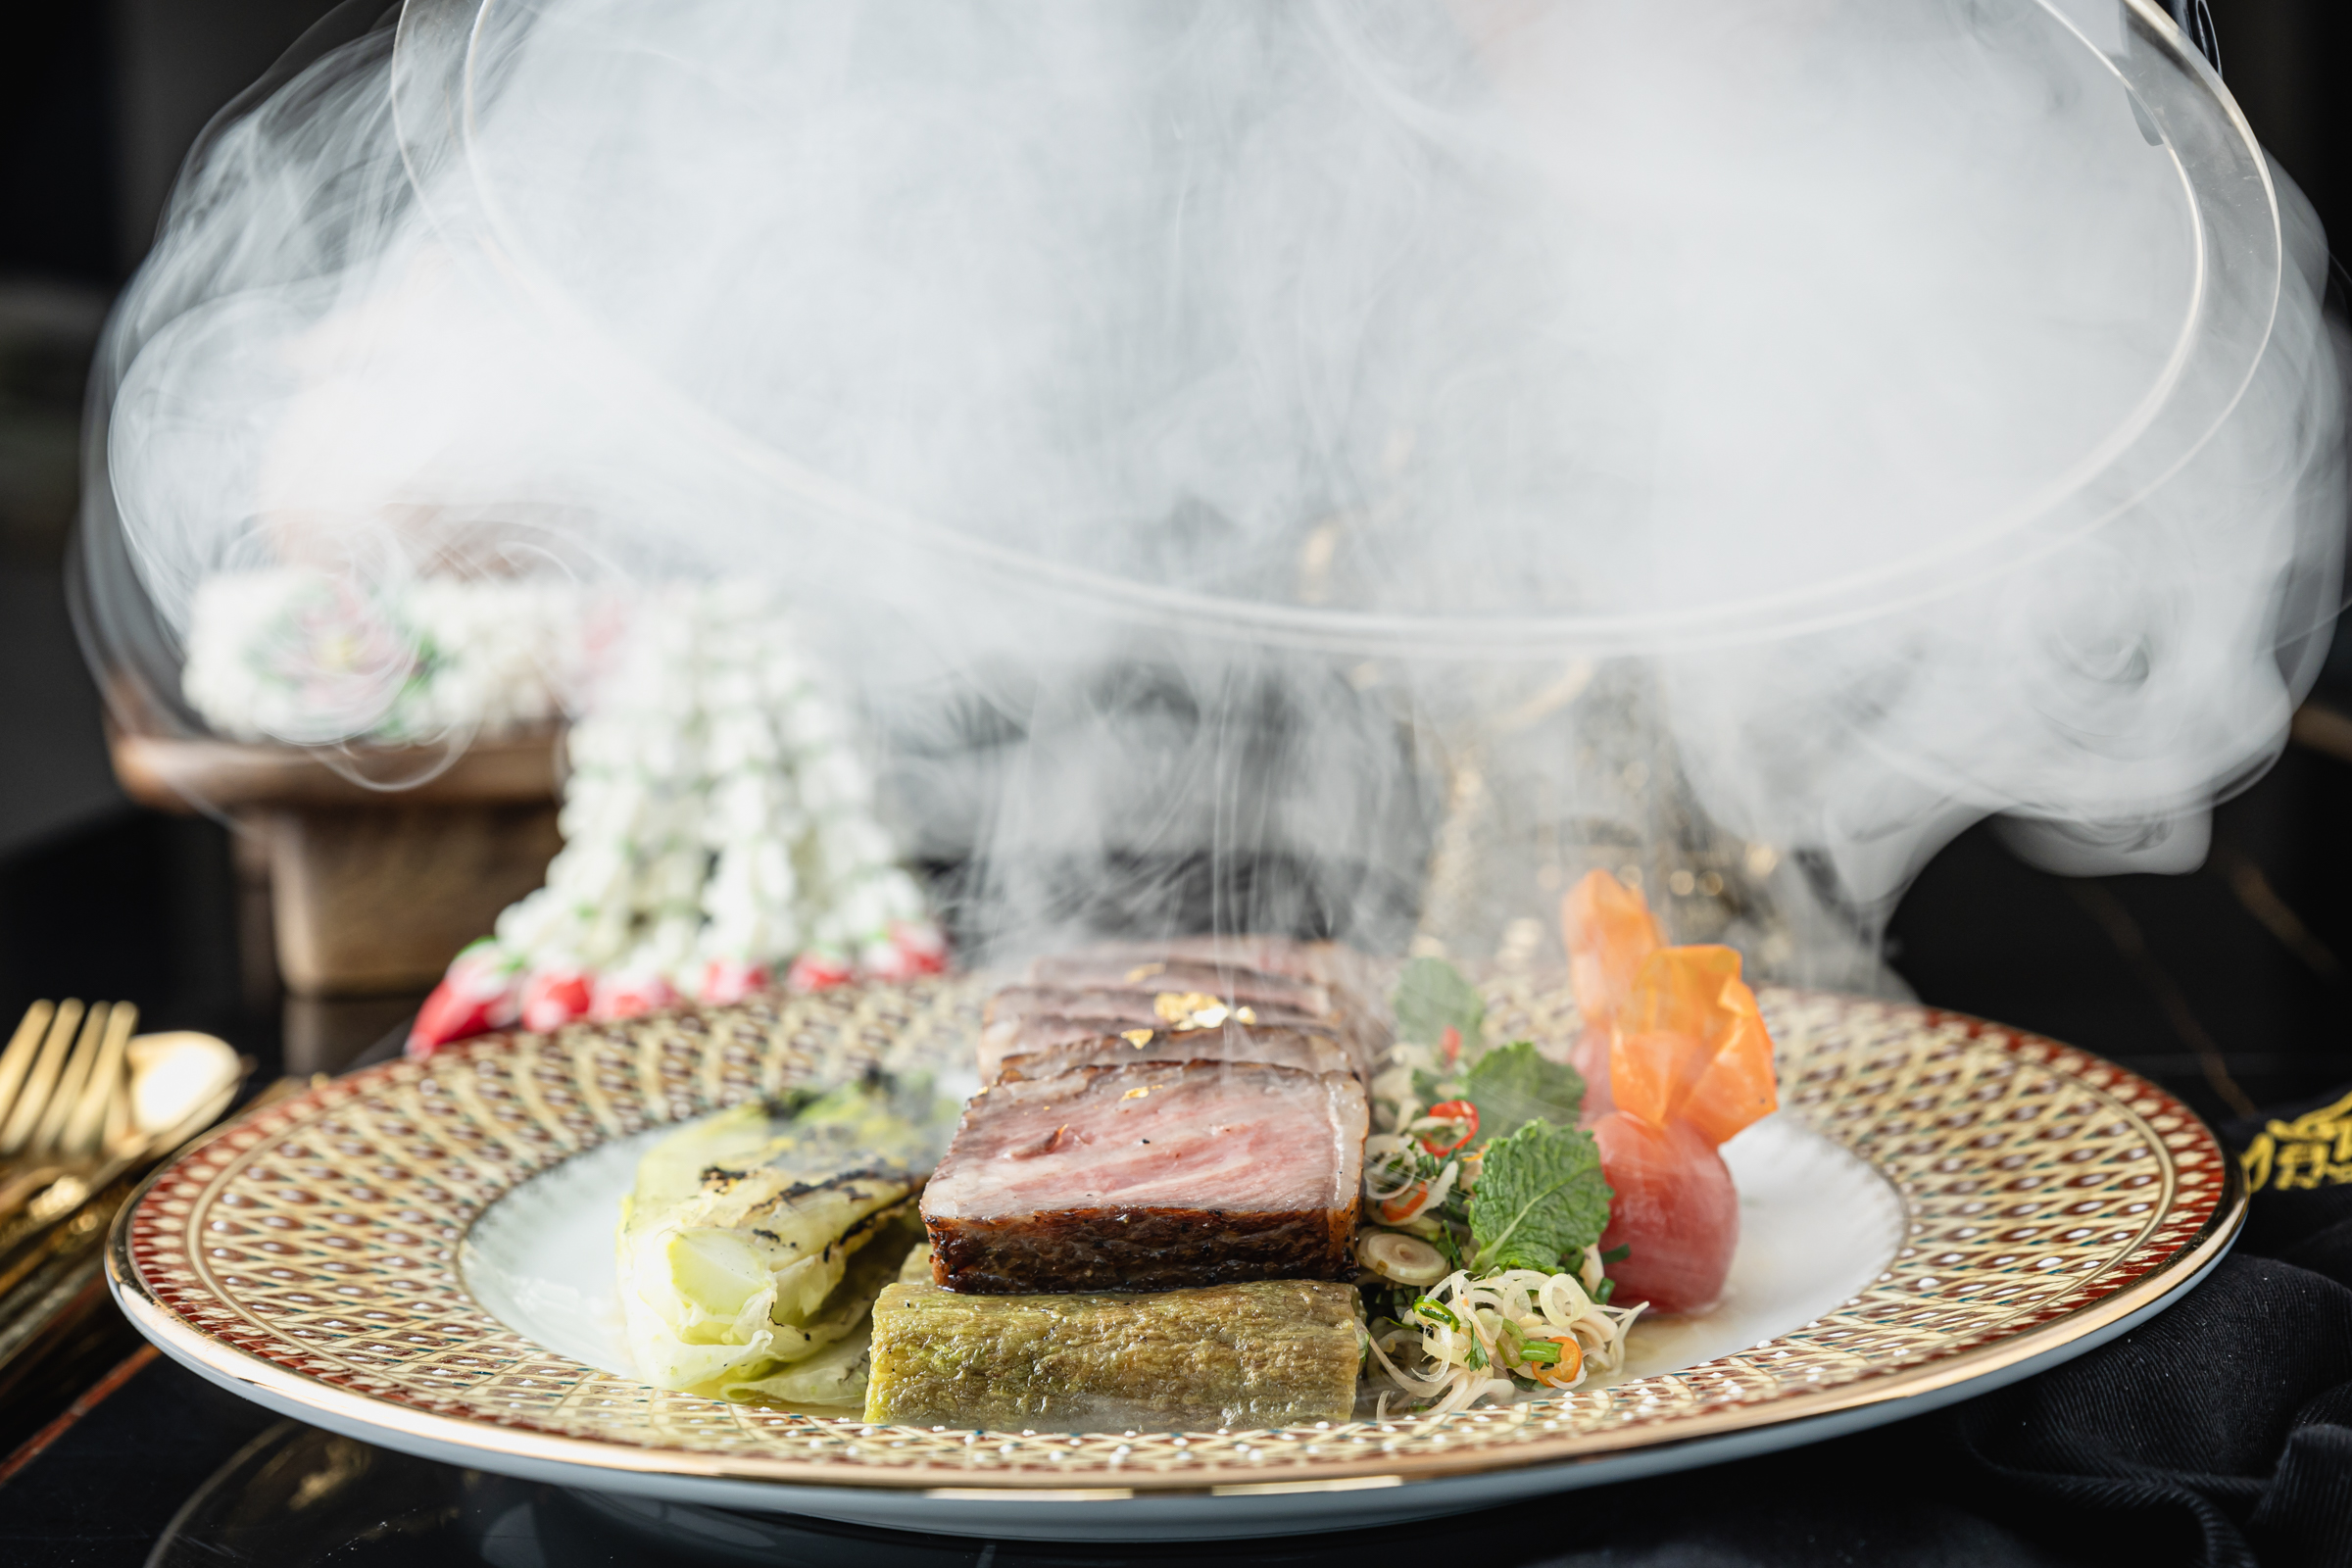 Slices of seared wagyu steak plated with charred eggplant, lemongrass, and carrots, with a cloud of smoke floating above.